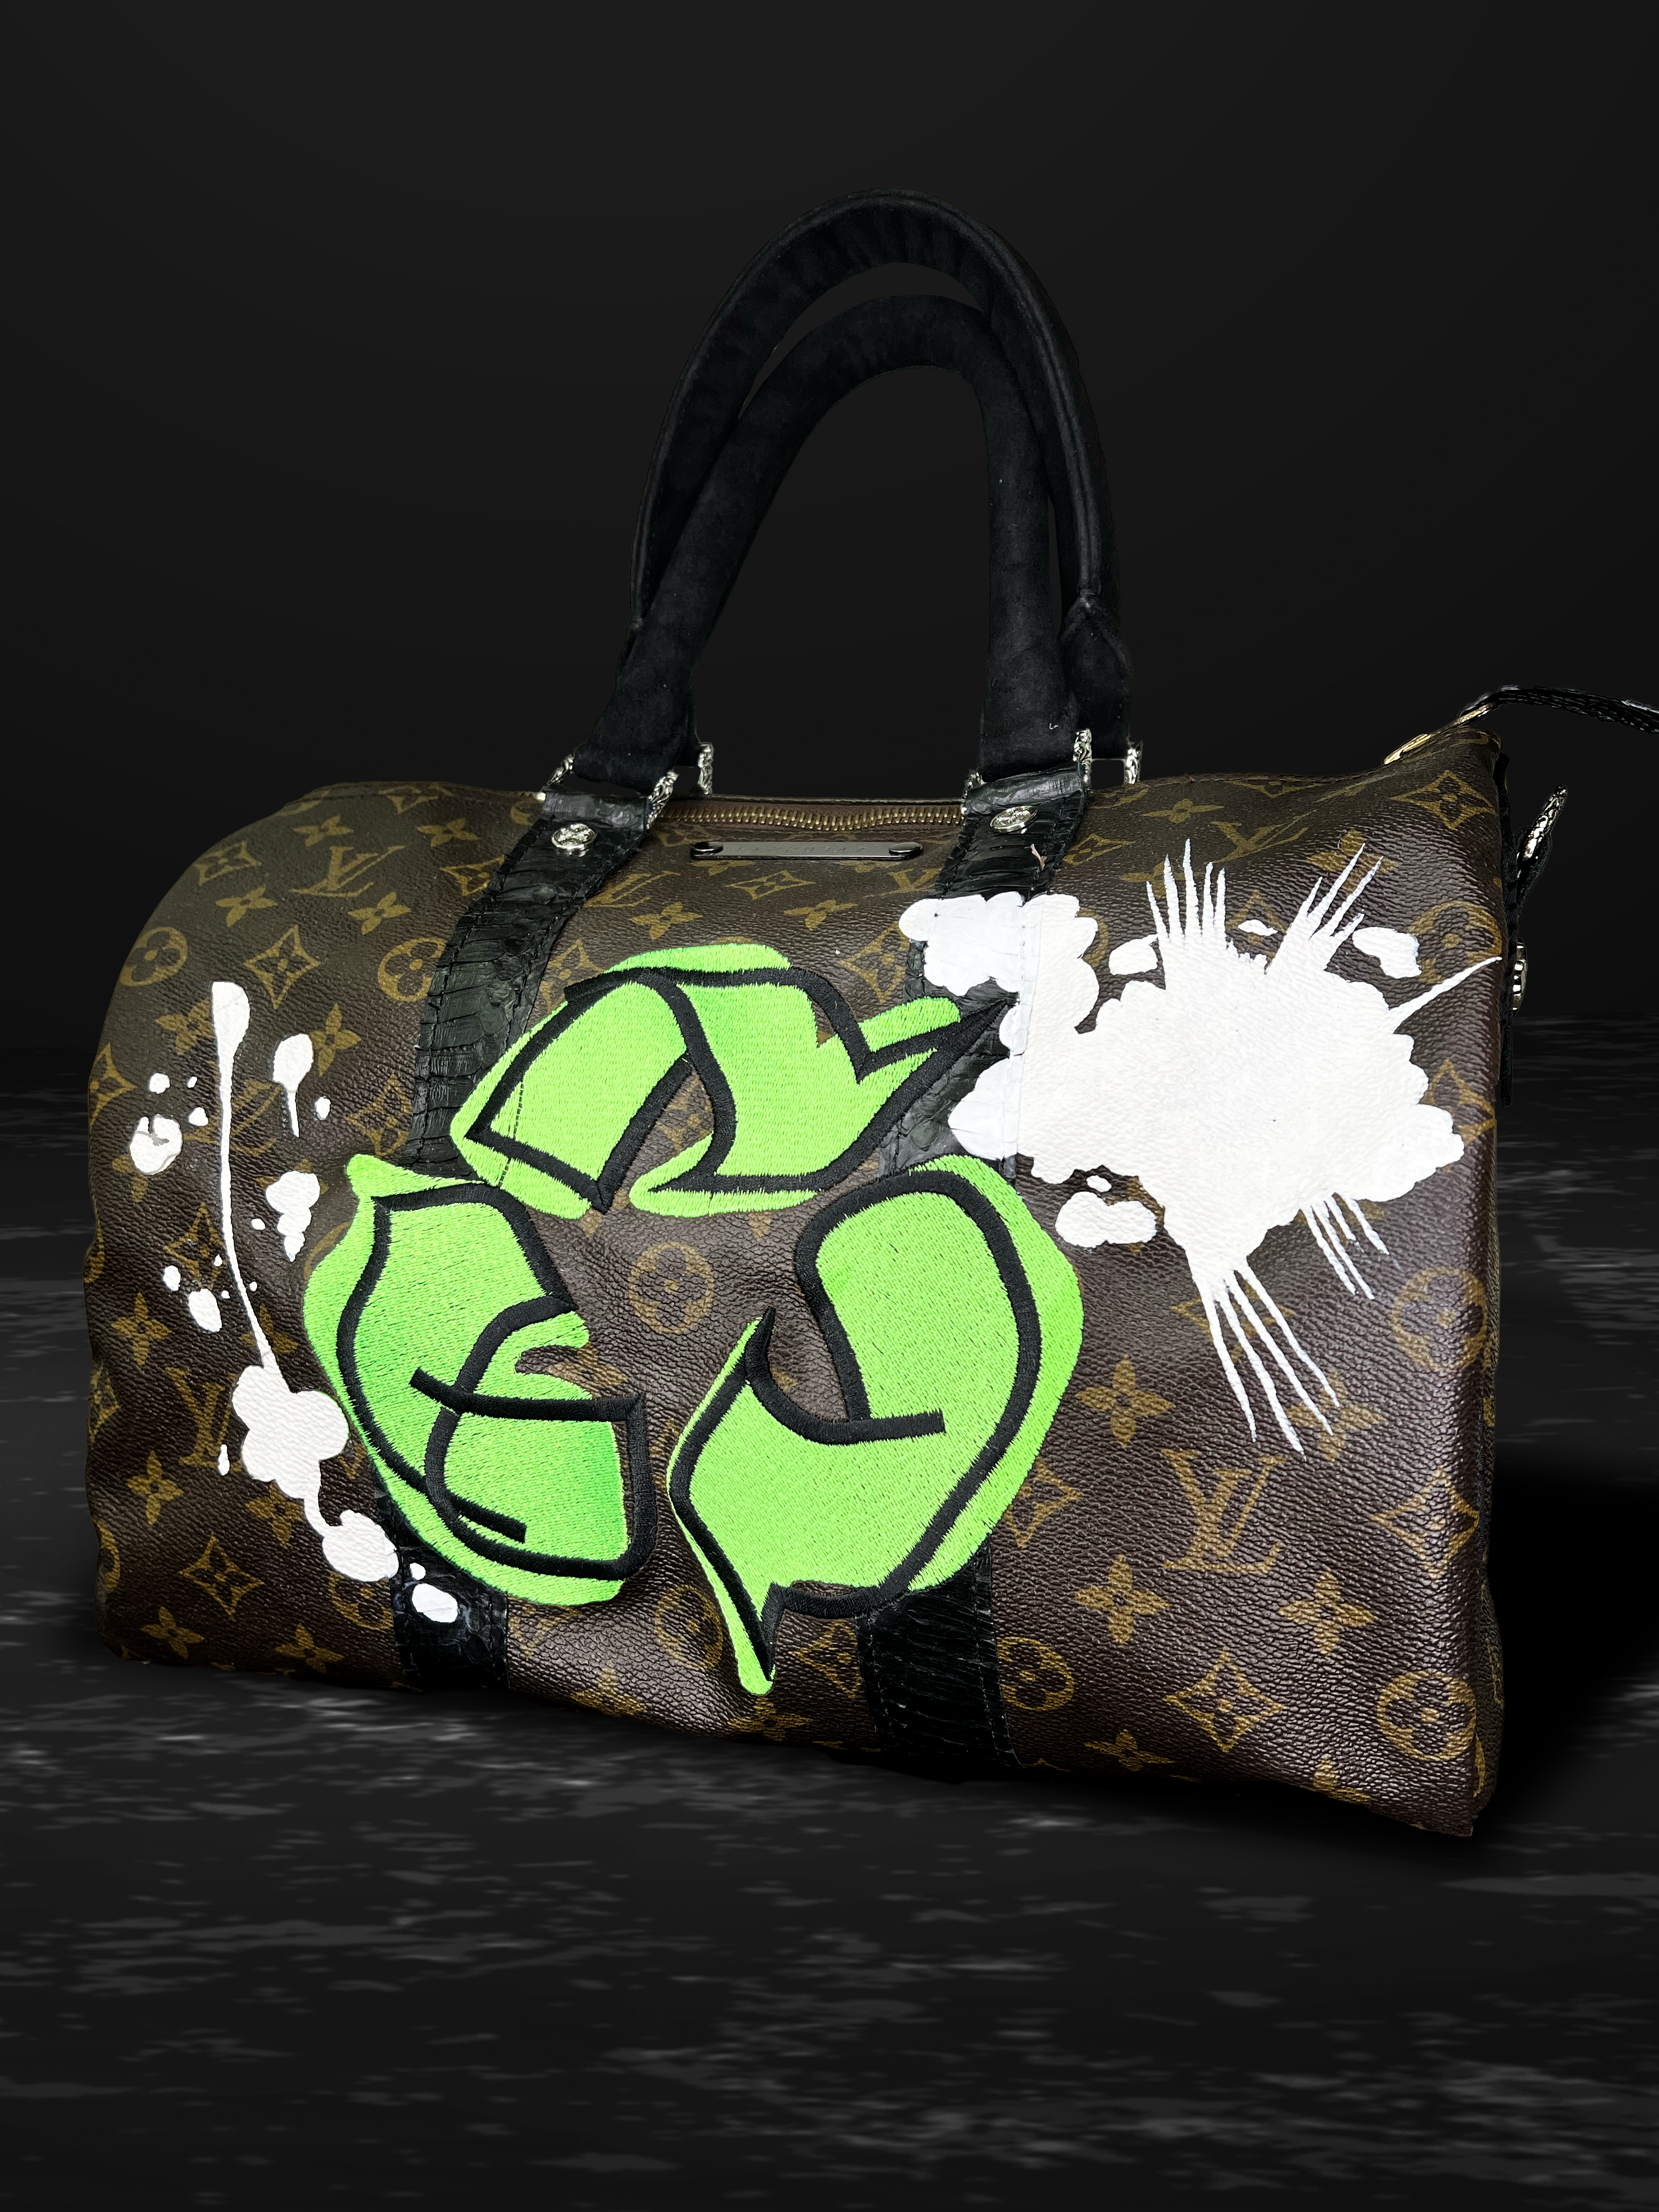 Graffiti Keepall 50 Duffle Bag (Authentic Pre-Owned) – The Lady Bag